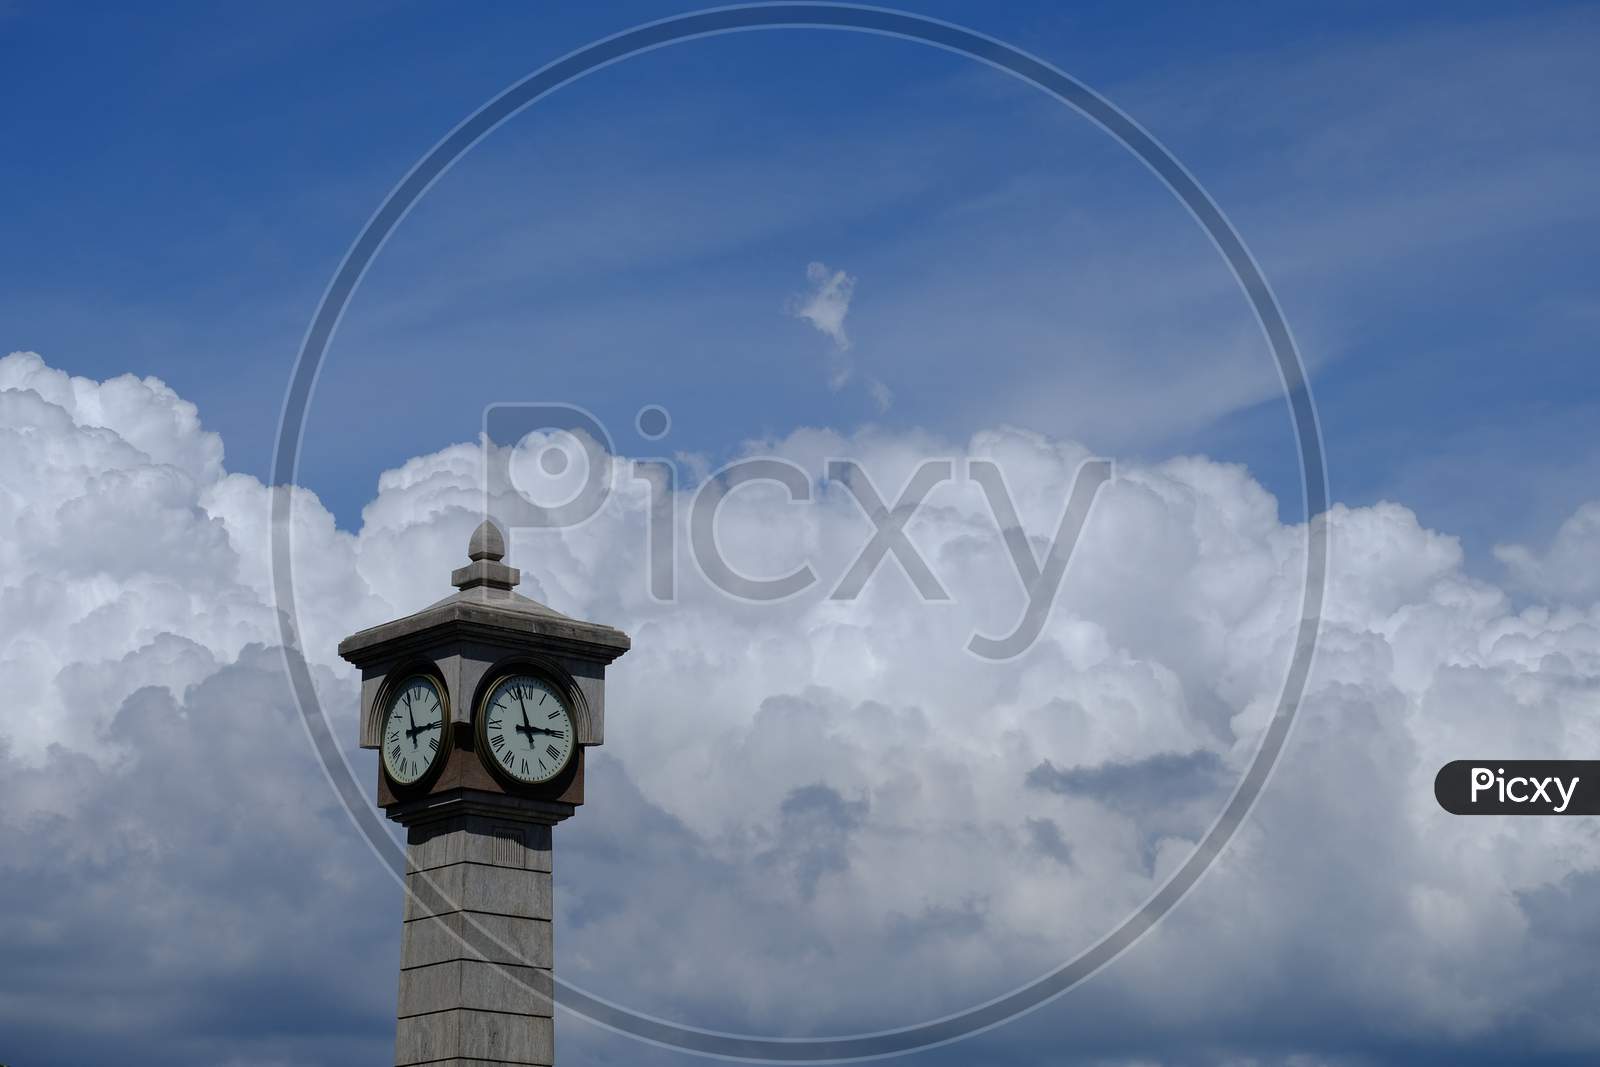 Isolated Clock Tower With Blue Sky And Cloud In Background, Copy Space